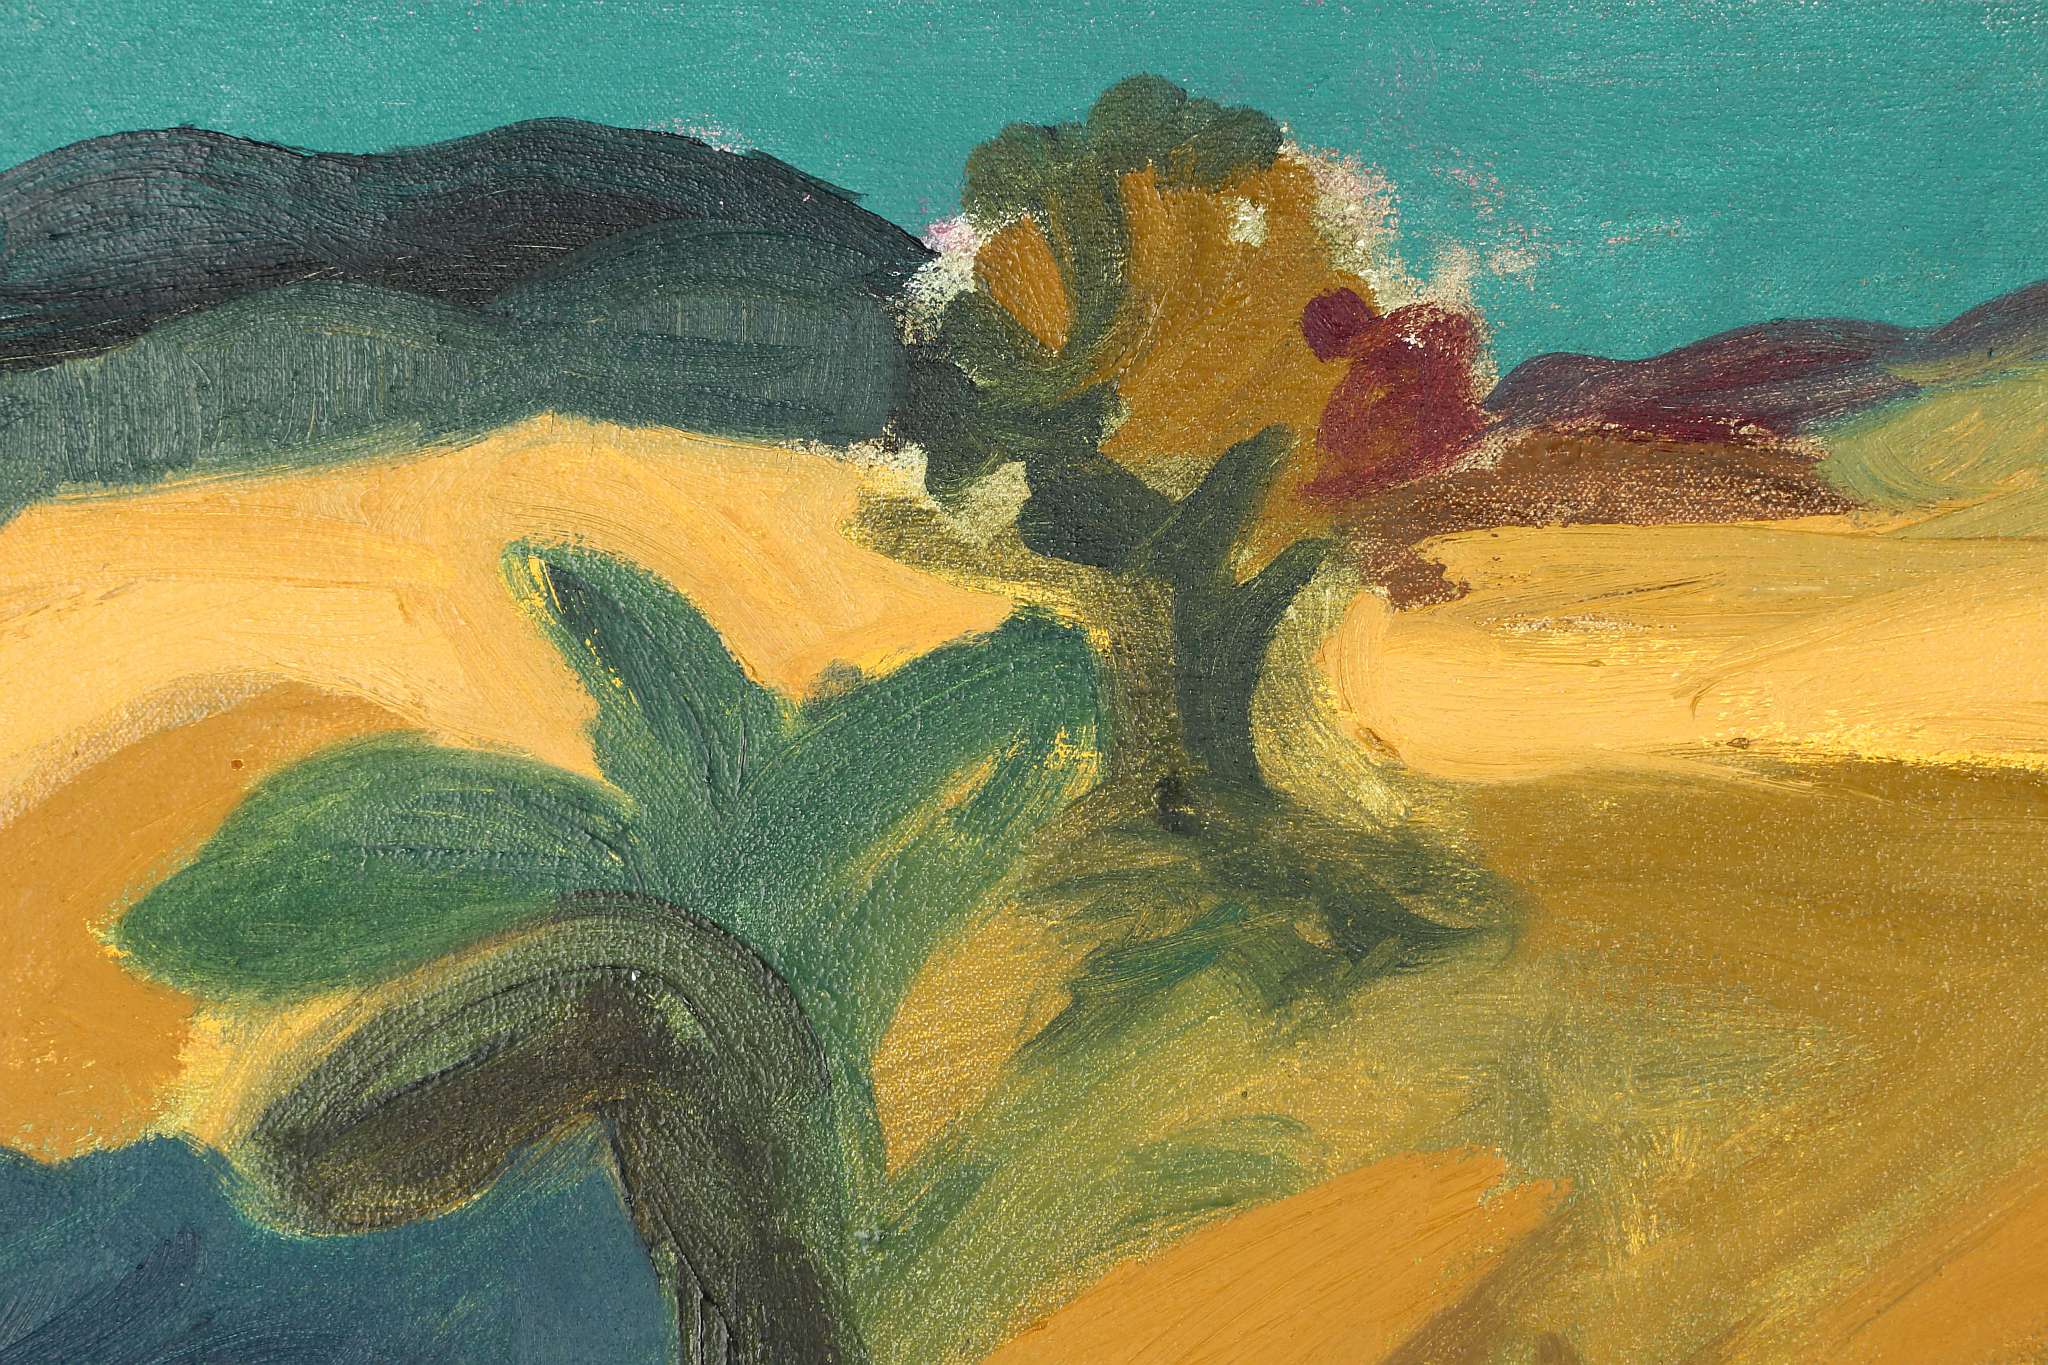 Lucy Ross, 20th century British, 'Portuguese Landscape', oil on canvas, signed lower left and - Image 2 of 5